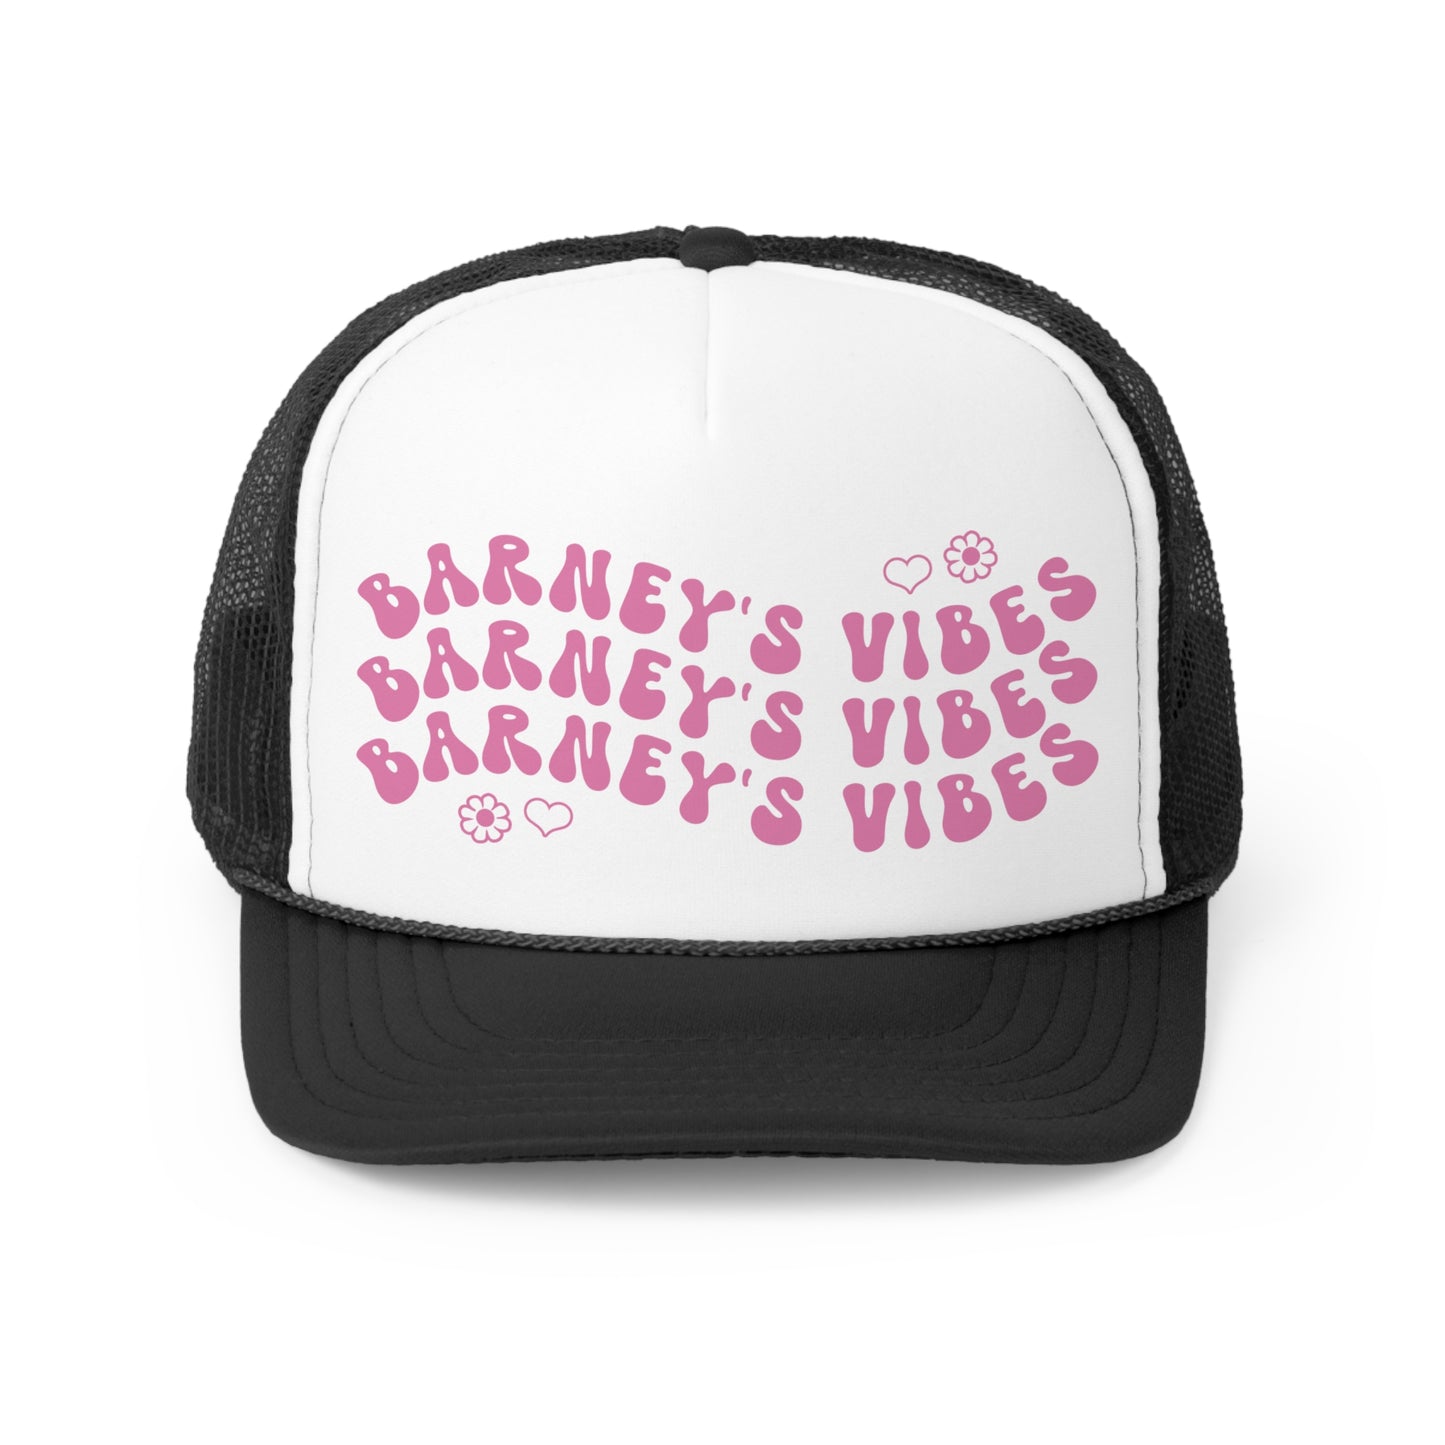 Barney's Vibes | BARNEY'S BEANERY - Trucker Hat | Berry Graphic On Black And White Trucker Hat, Front View